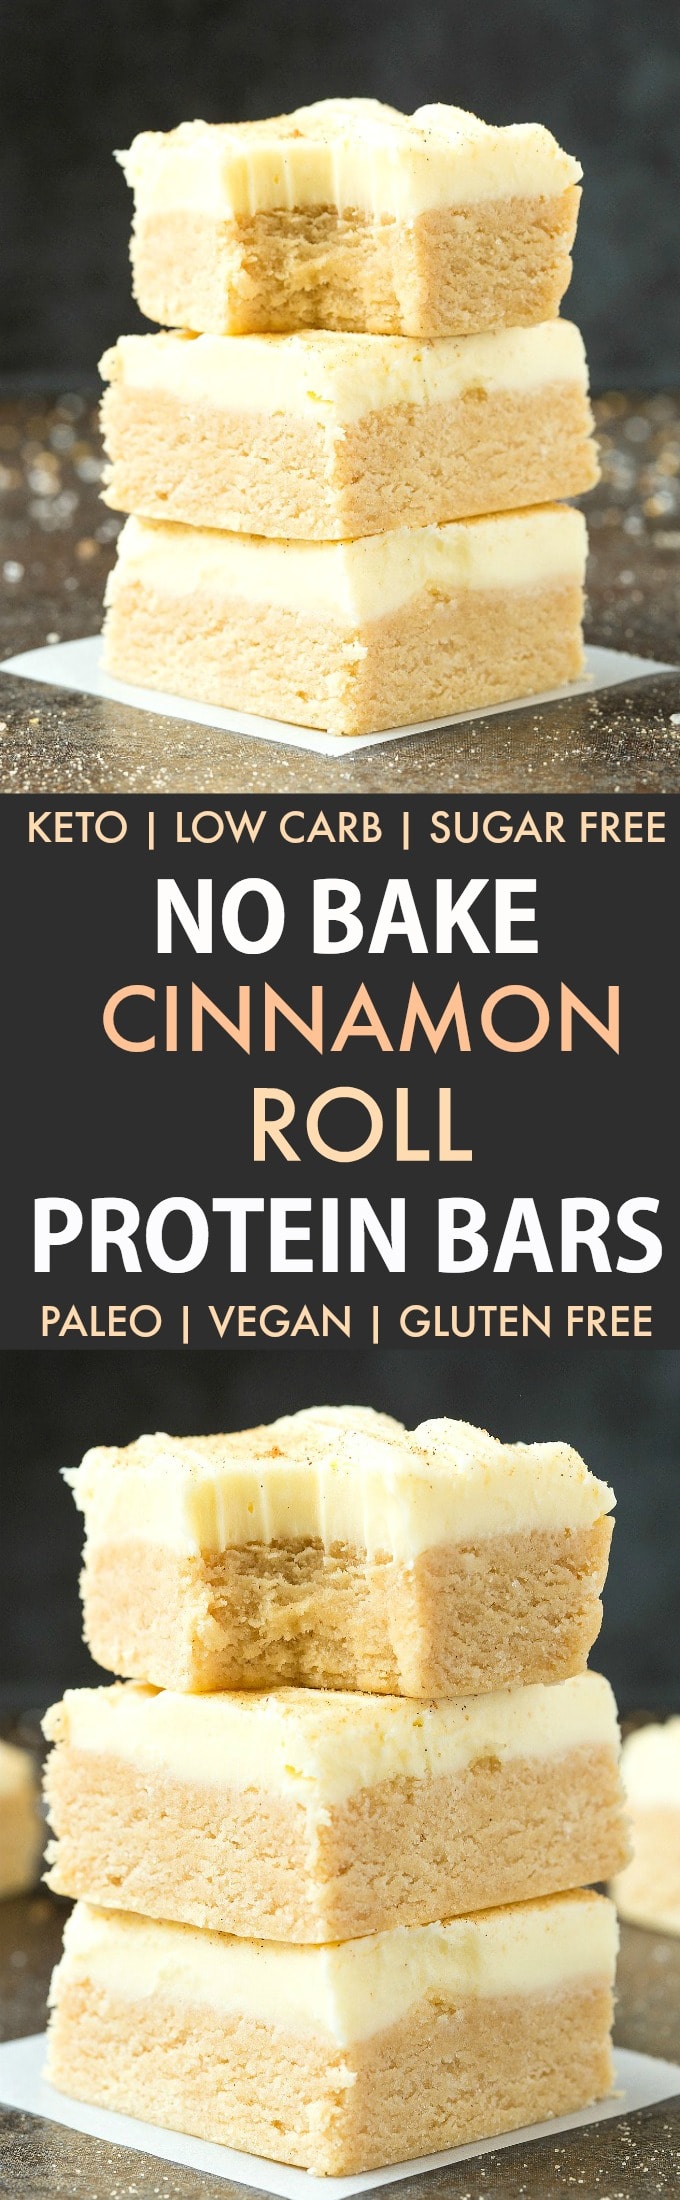 Easy No Bake Paleo Vegan Cinnamon Roll Protein Bar Recipe (Keto, Low Carb, Sugar Free)- Quick and easy homemade protein bars which taste like a cinnamon roll and has no protein powder- Soft, chewy and thick! Sugar free, dairy free and ready in 5 minutes! #proteinbar #ketosnack #paleo #vegan #cinnamonroll | Recipe on thebigmansworld.com